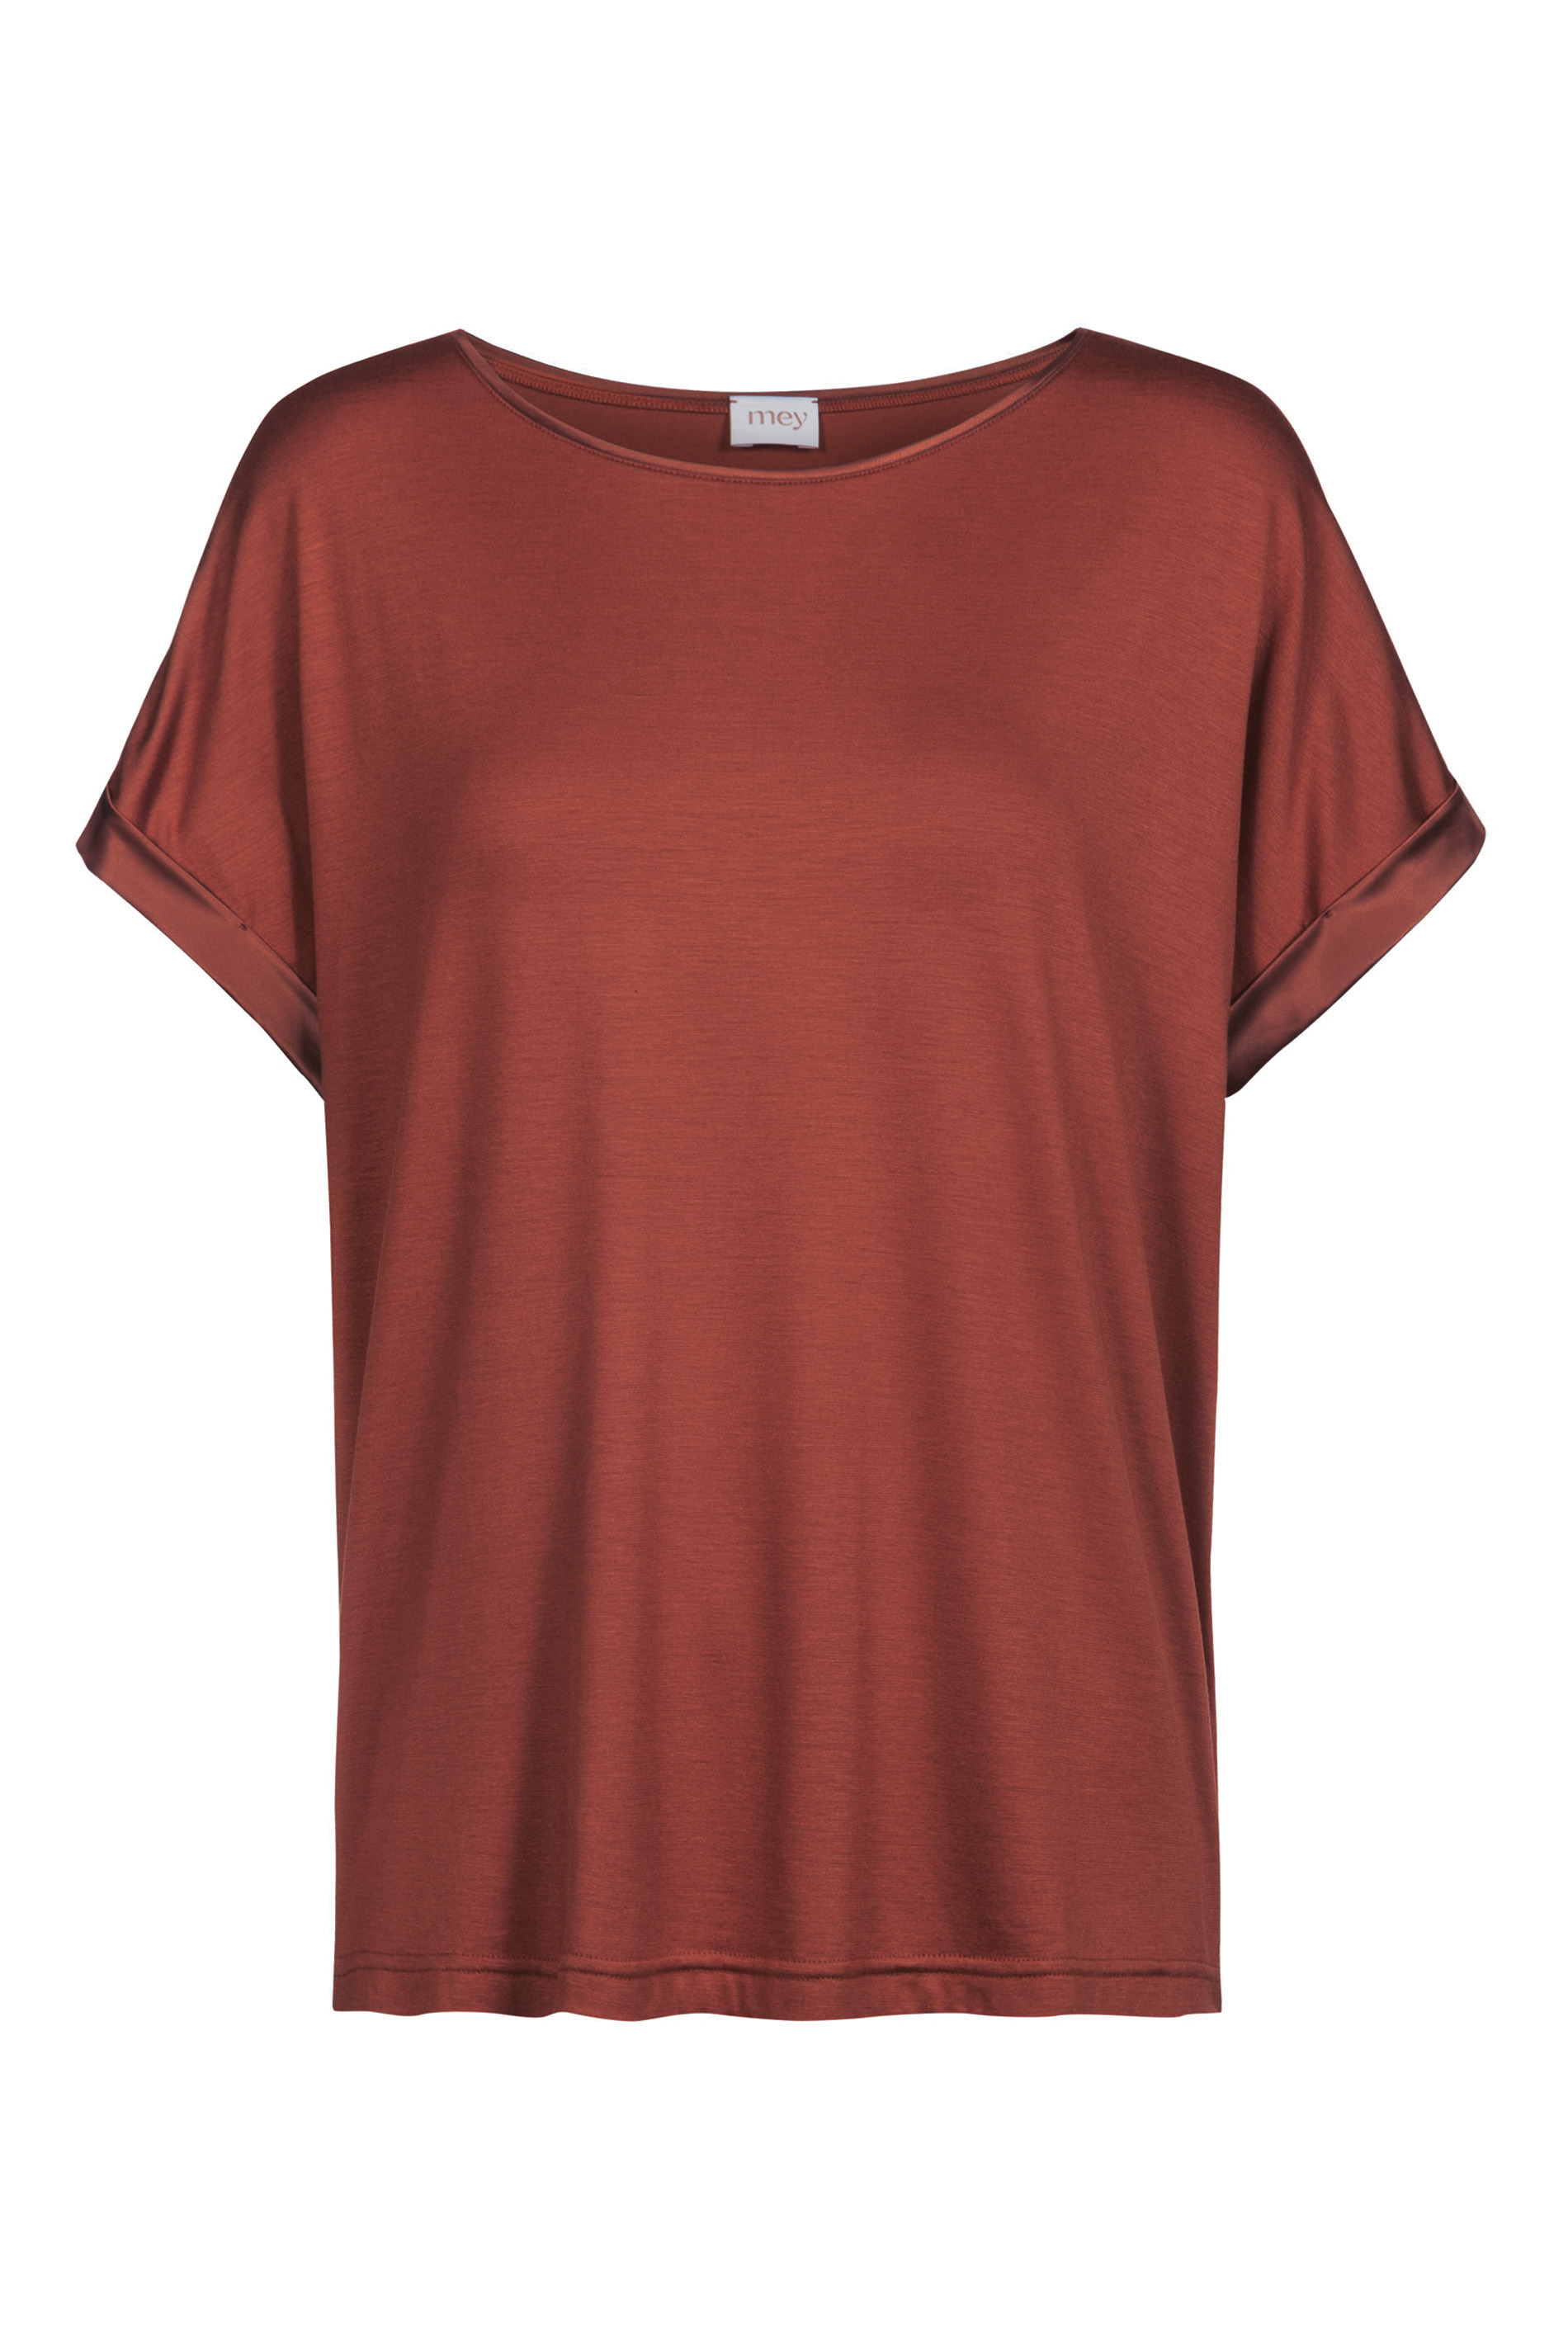 Shirt Red Pepper Serie Alena Uitknippen | mey®